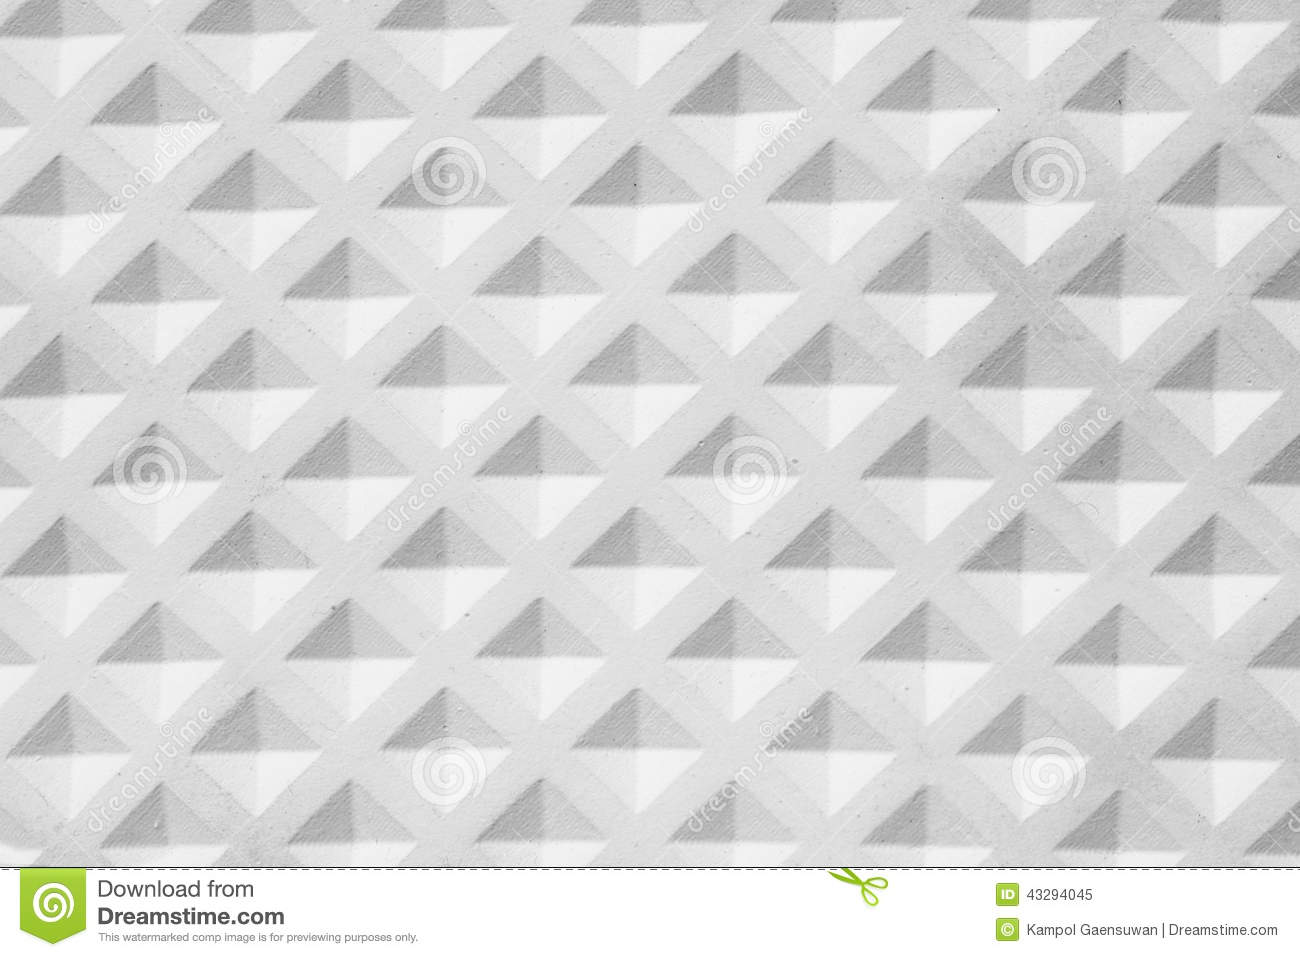 Texture Of White Square Tile Rubber Stock Photo   Image  43294045